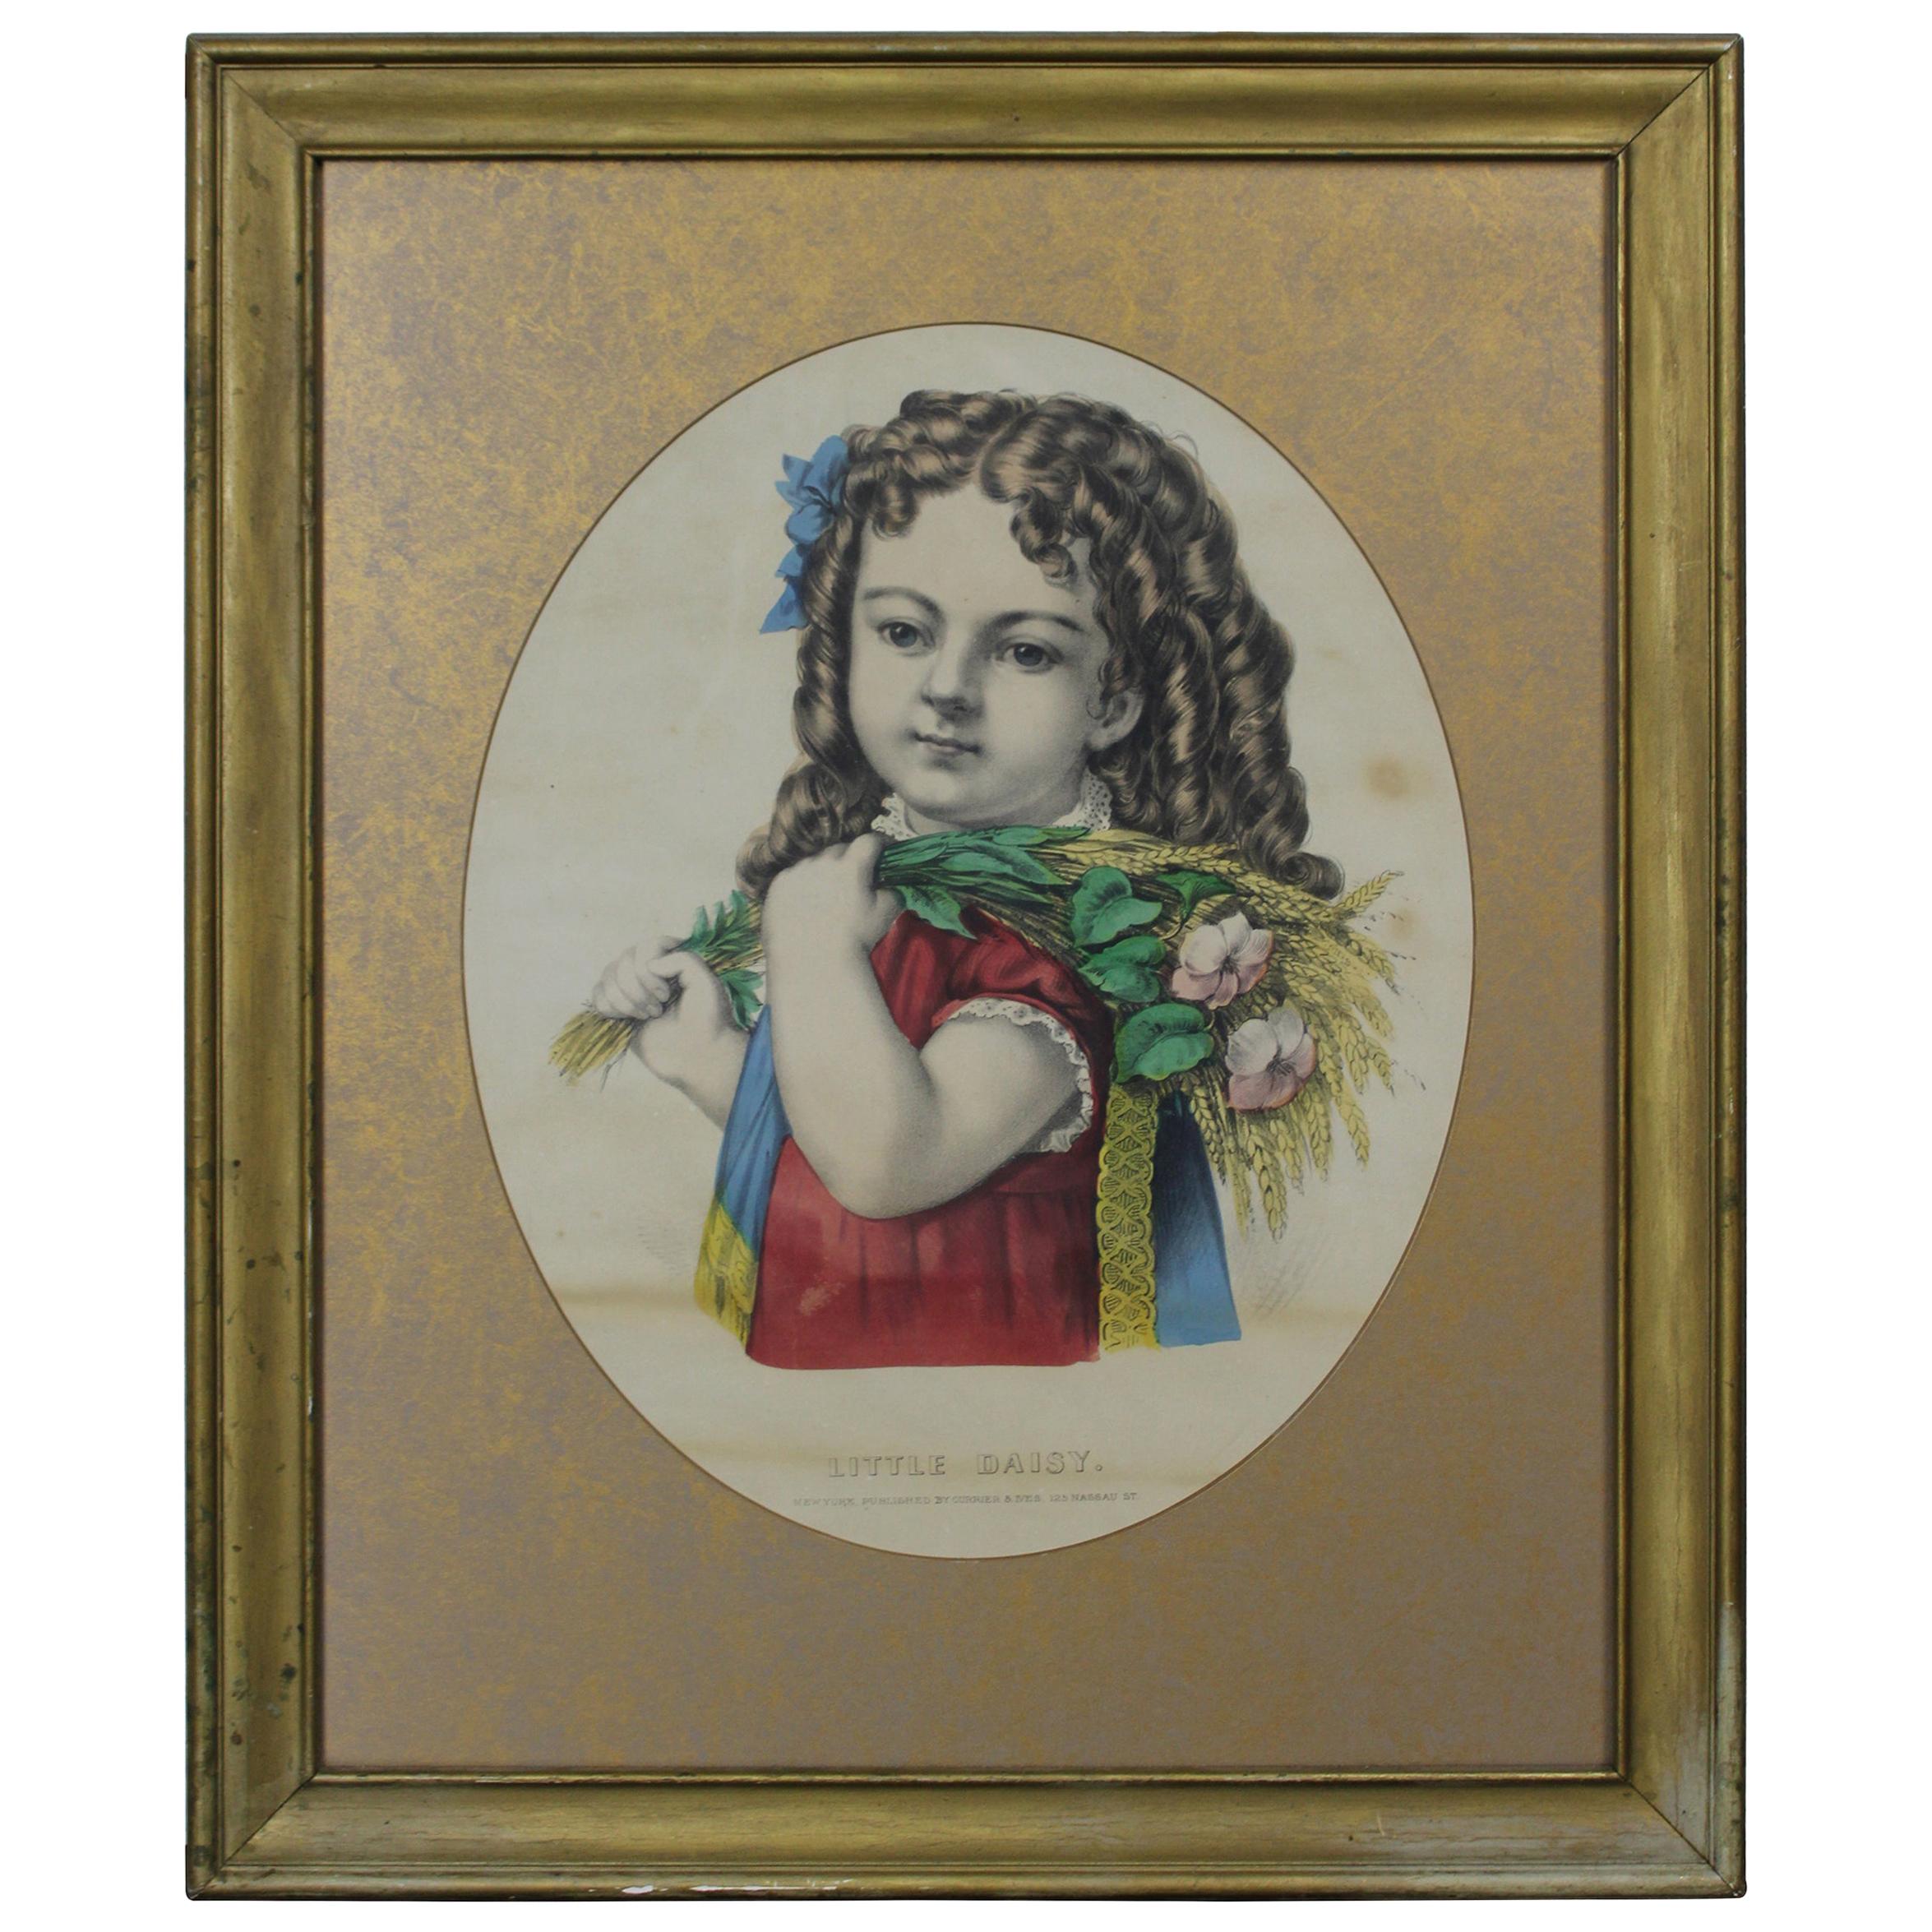 Antique Currier & Ives Little Daisy Lithograph Victorian Girl Flowers Gold